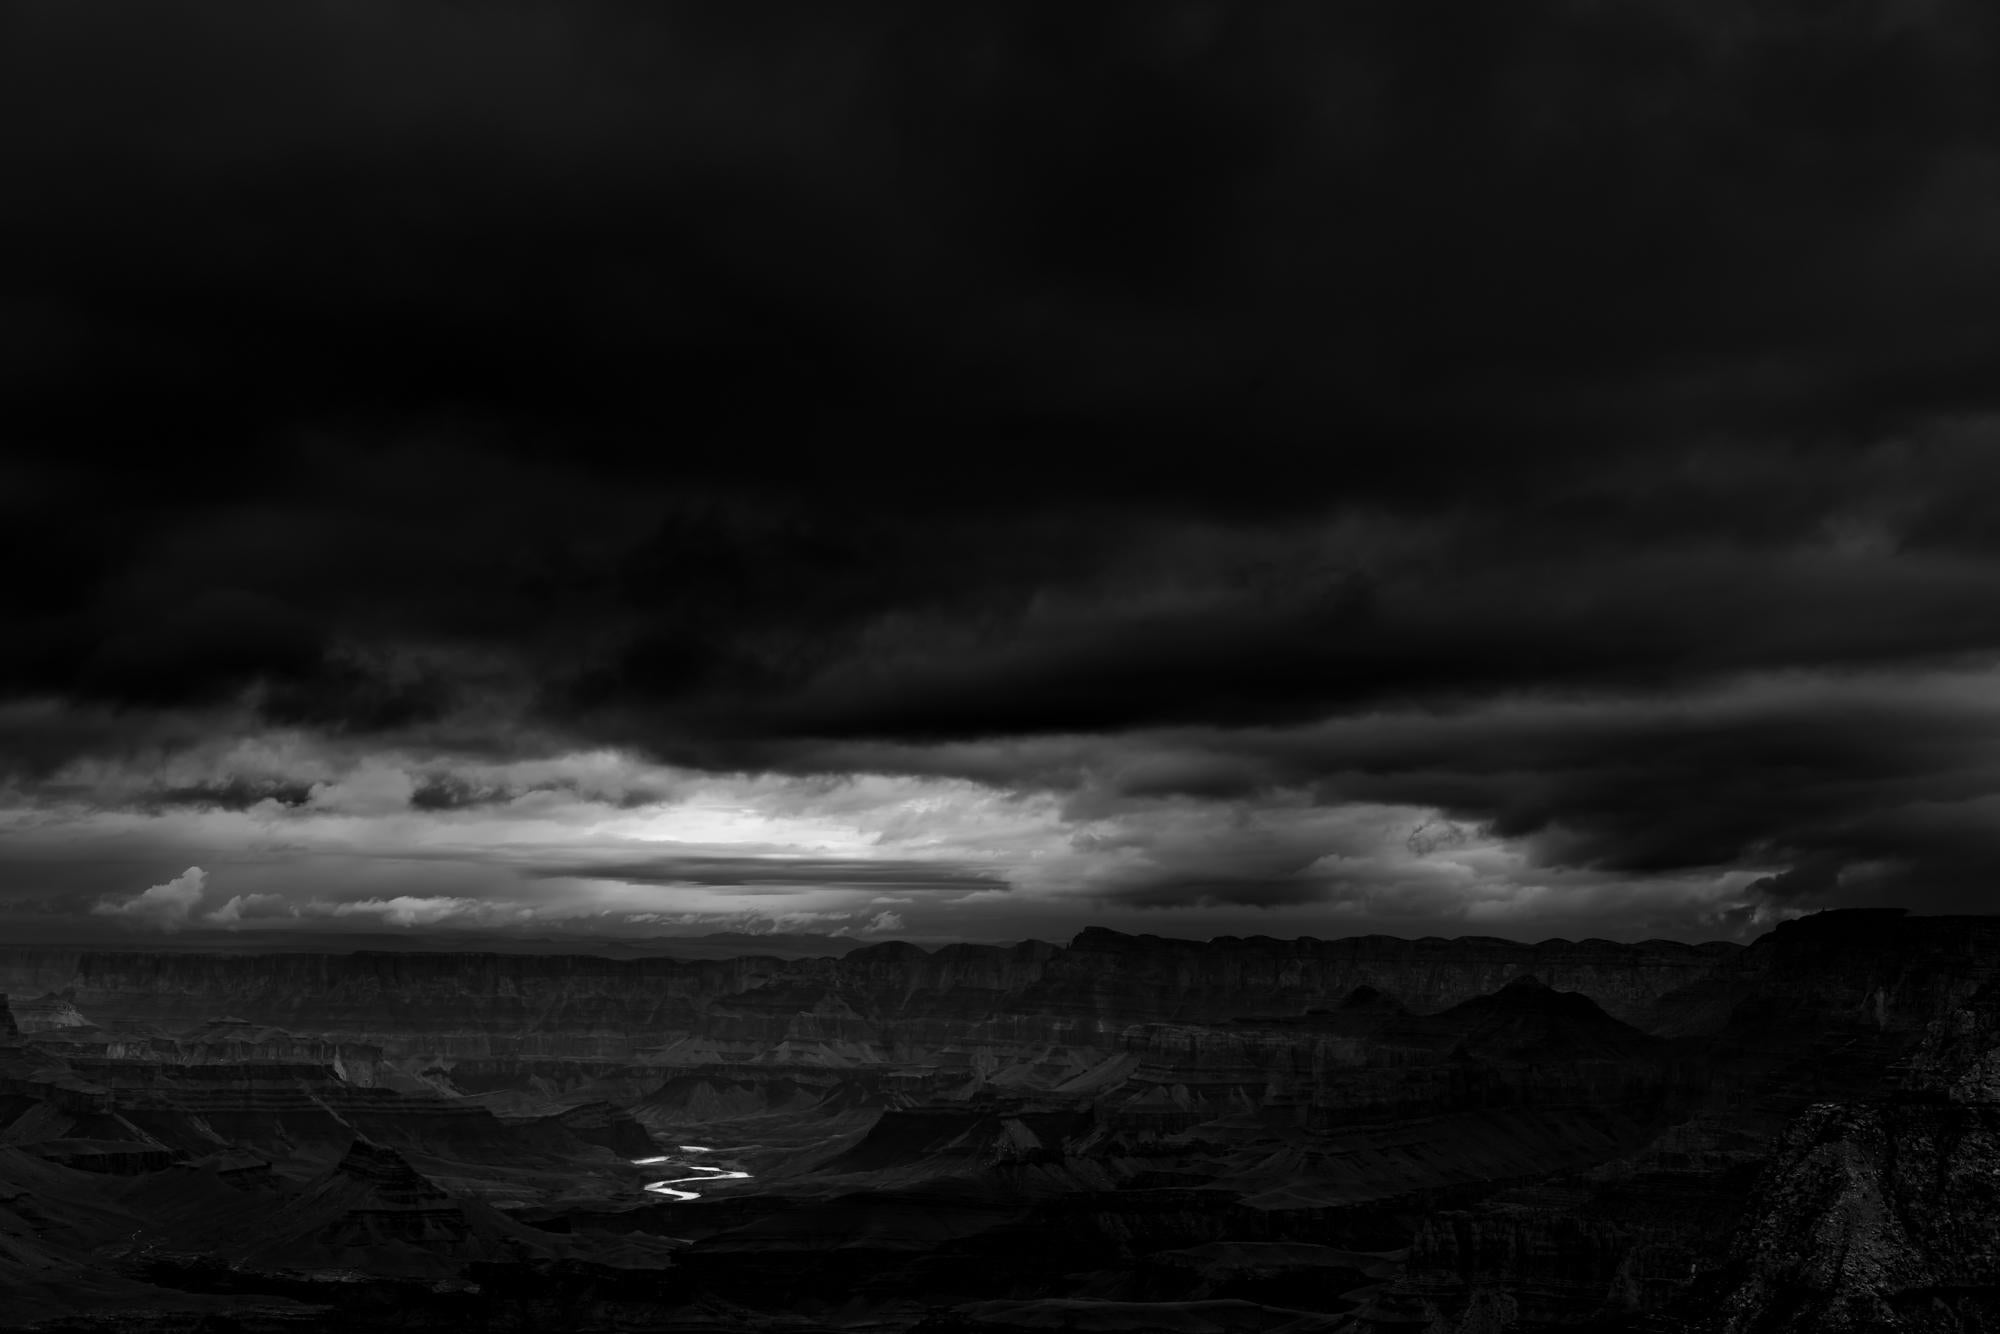 Howard Lewis Landscape Photograph -  Limited Edition Black and White Photograph - Colorado River 2018